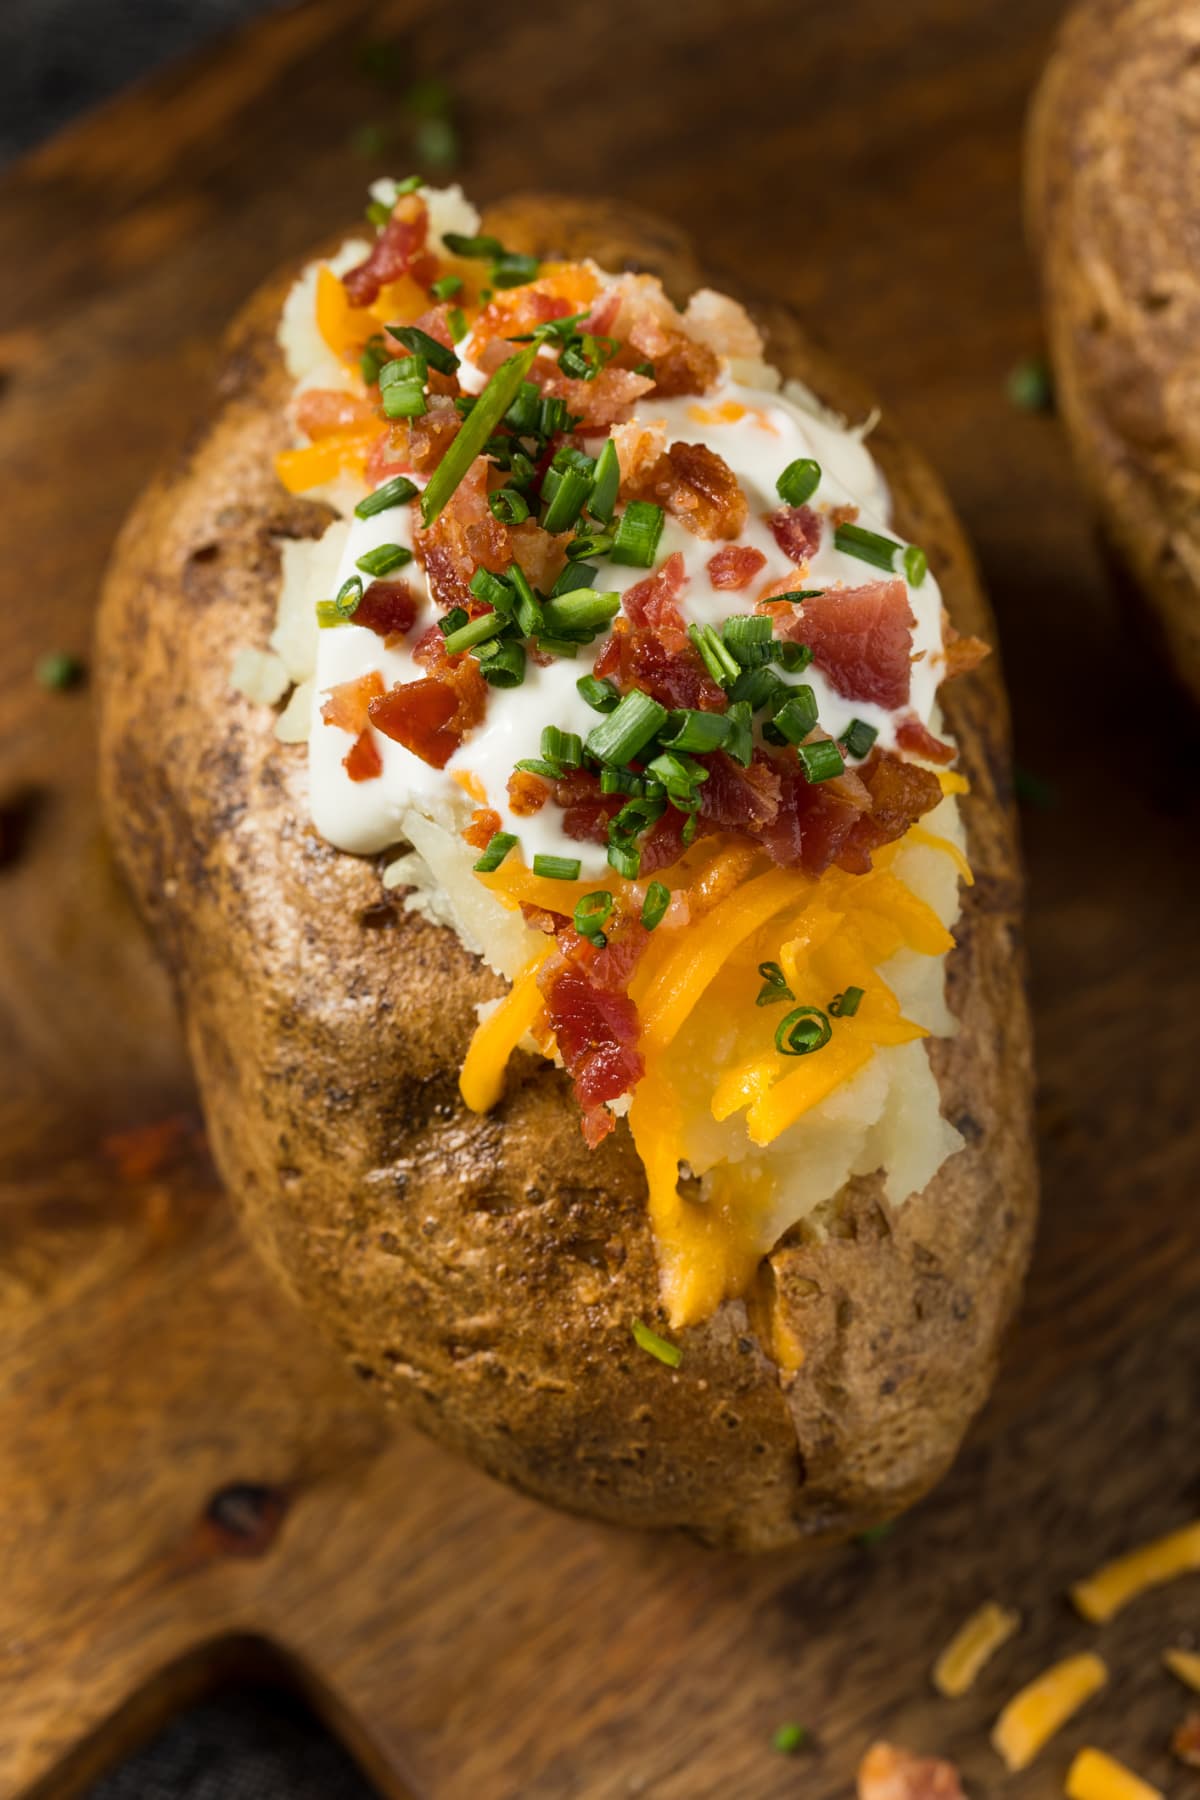 A baked potato with bacon, sour cream, and chives